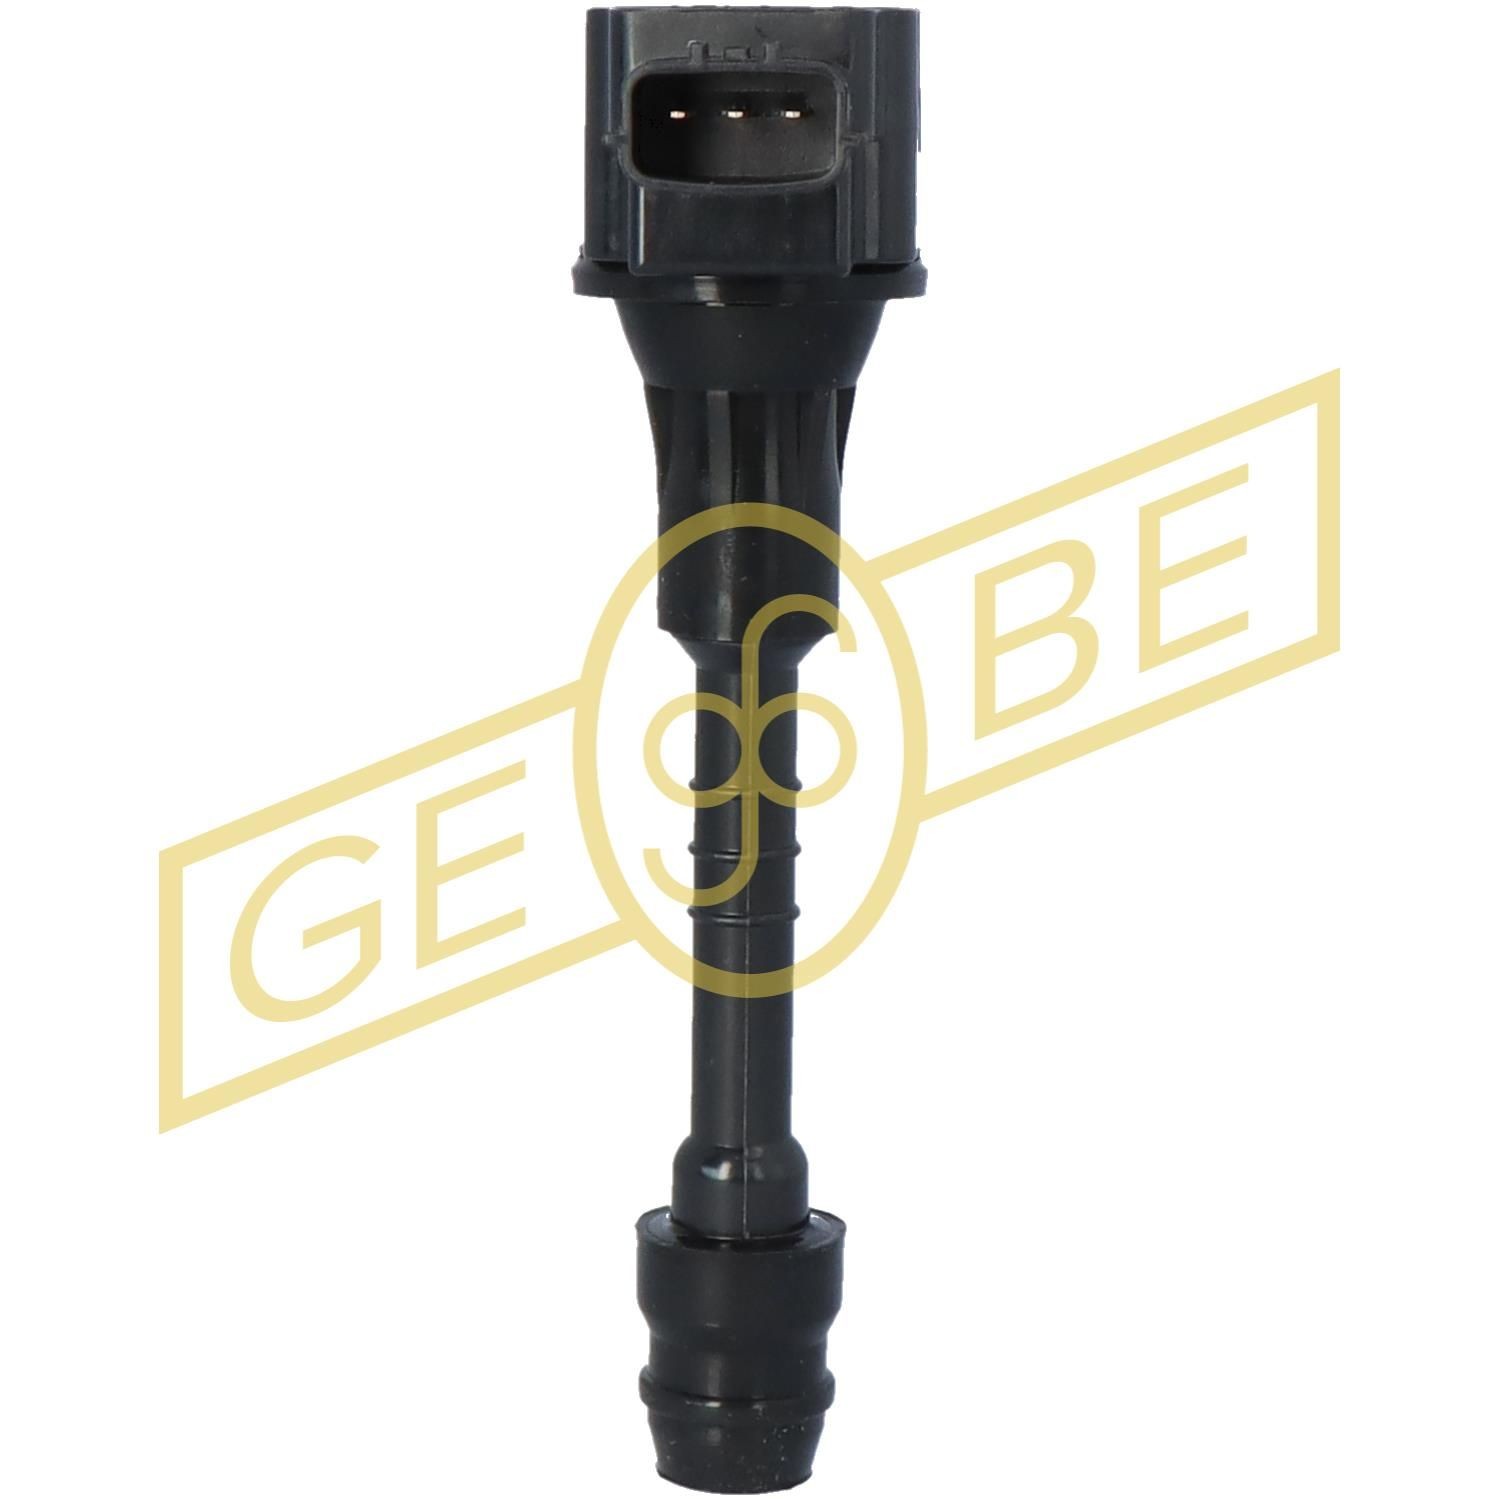 GEBE 945681 Ignition coil 22448-6N002